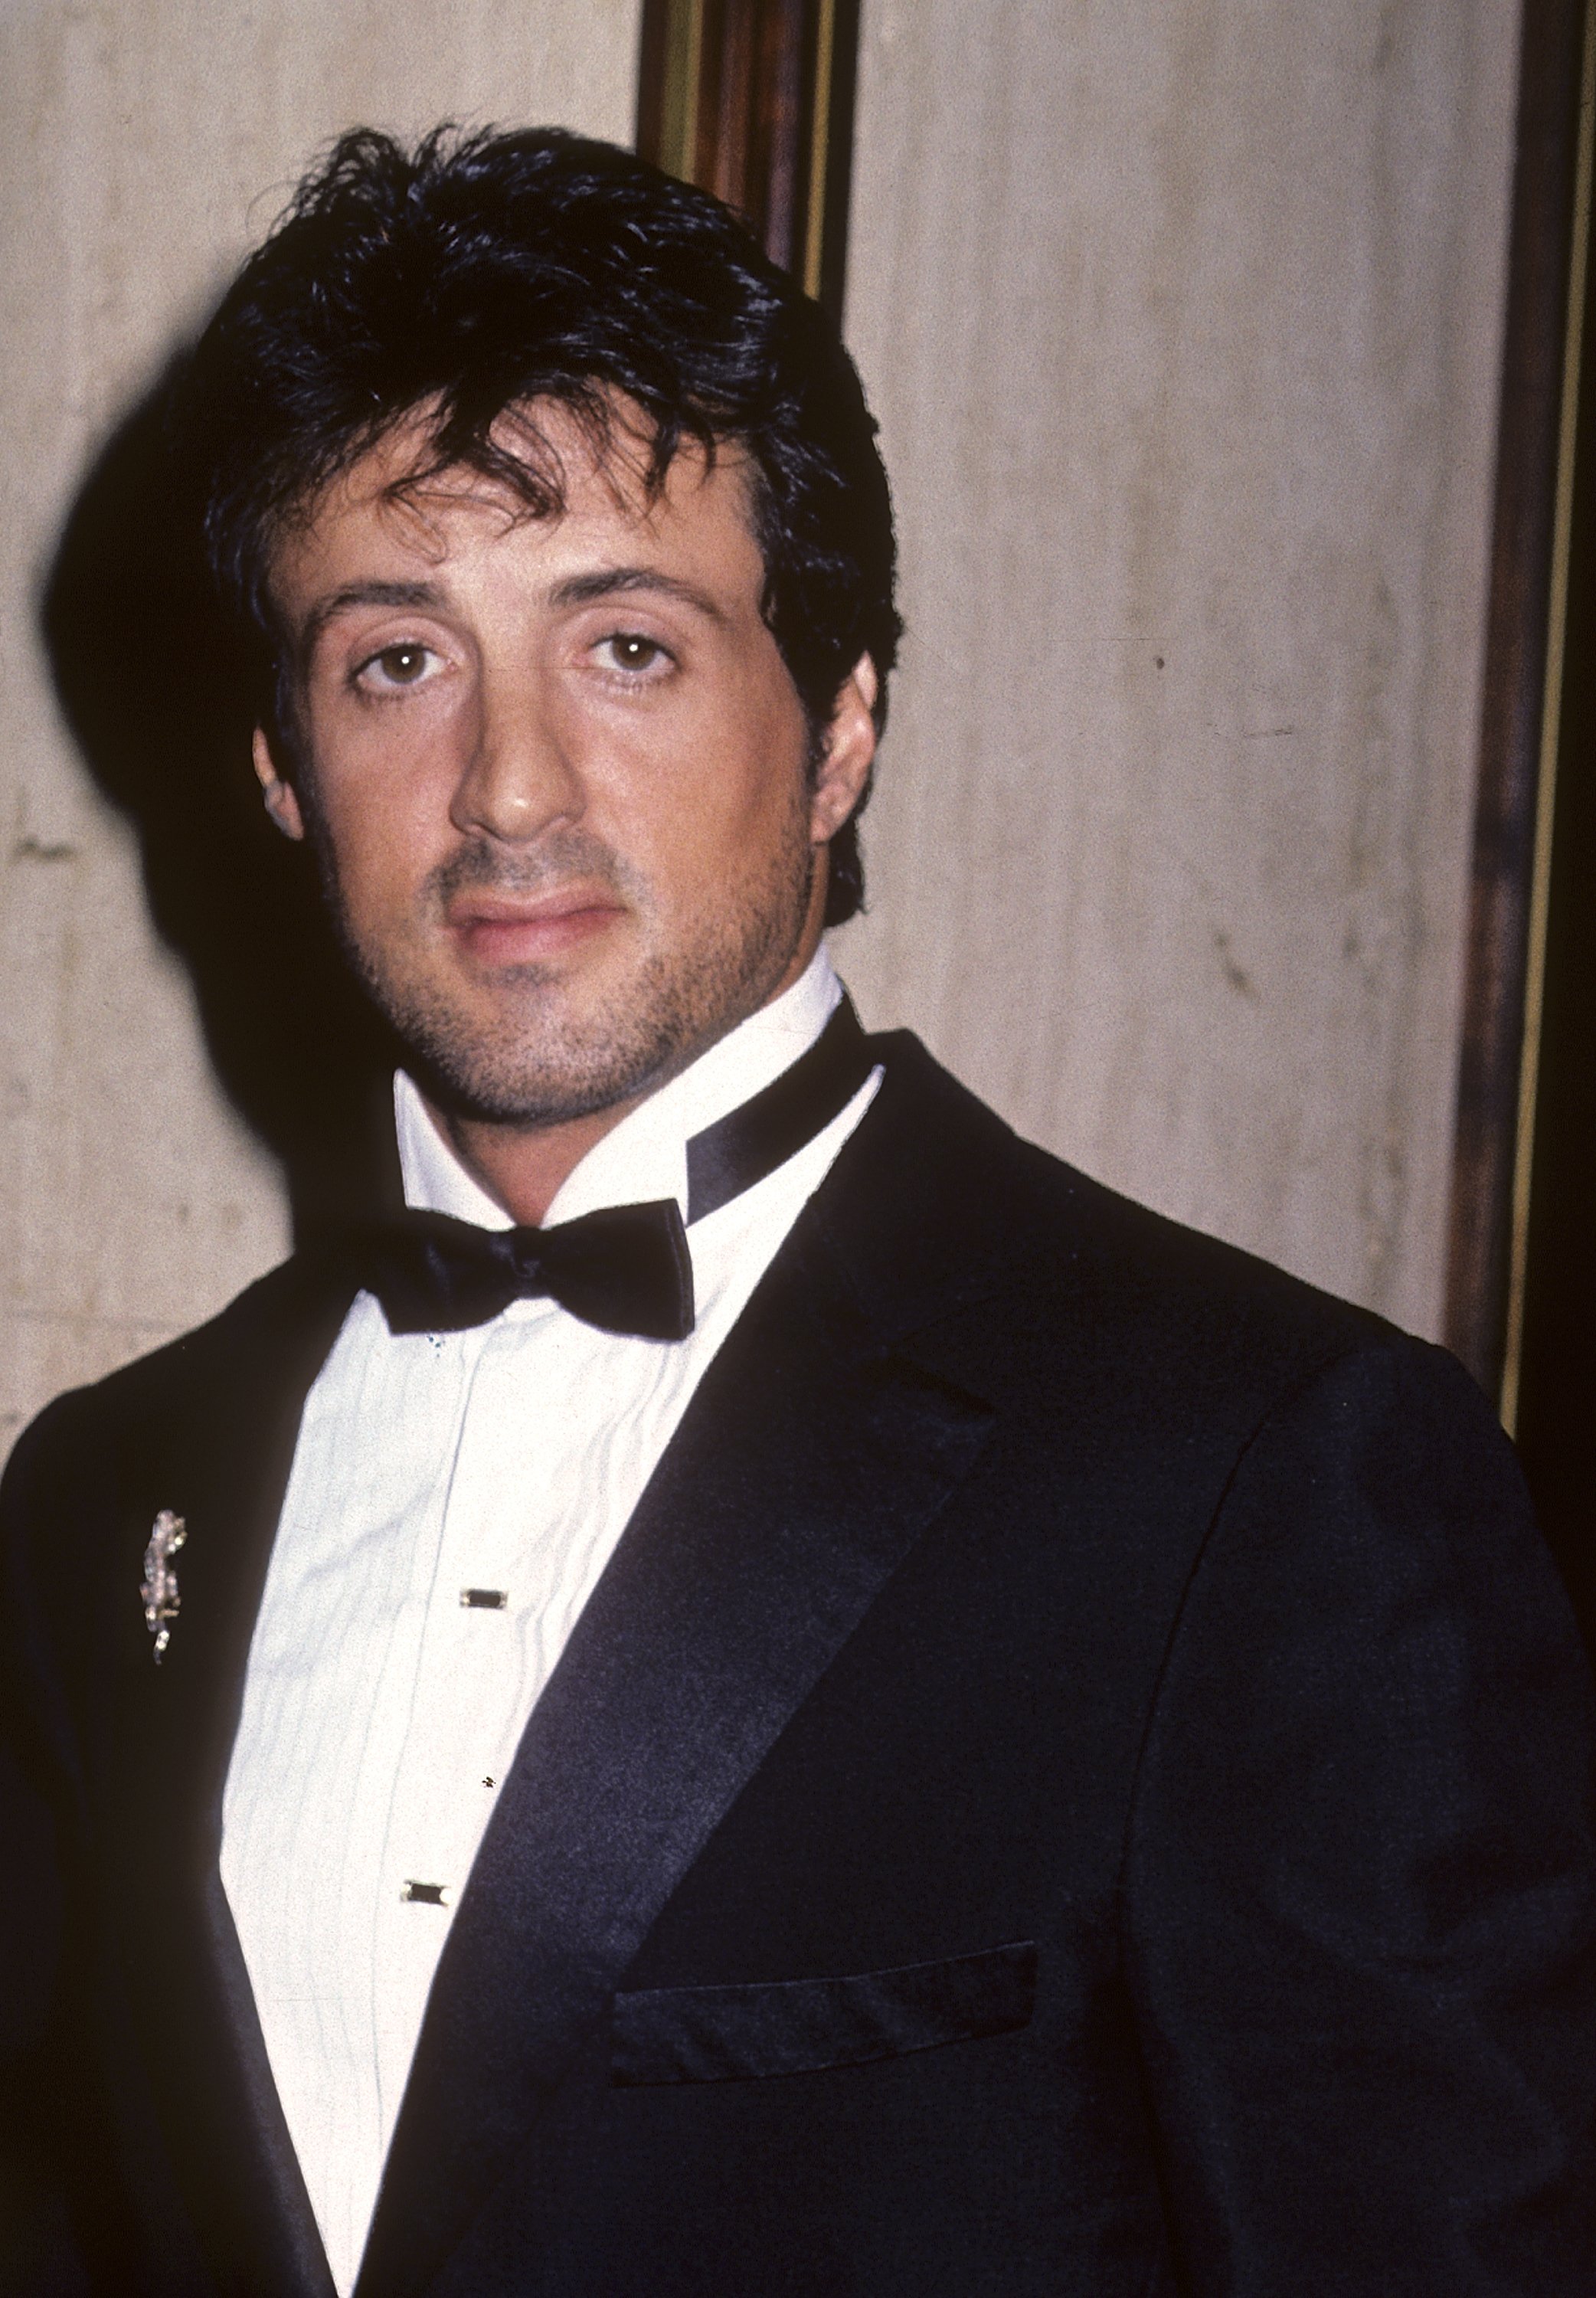 Sylvester Stallone at the American Friends of Hebrew University's 16th Annual Scopus Award Salute to Peter V. Ueberroth on December 5, 1985, in Century City, California. | Source: Ron Galella, Ltd./Ron Galella Collection/ Getty Images